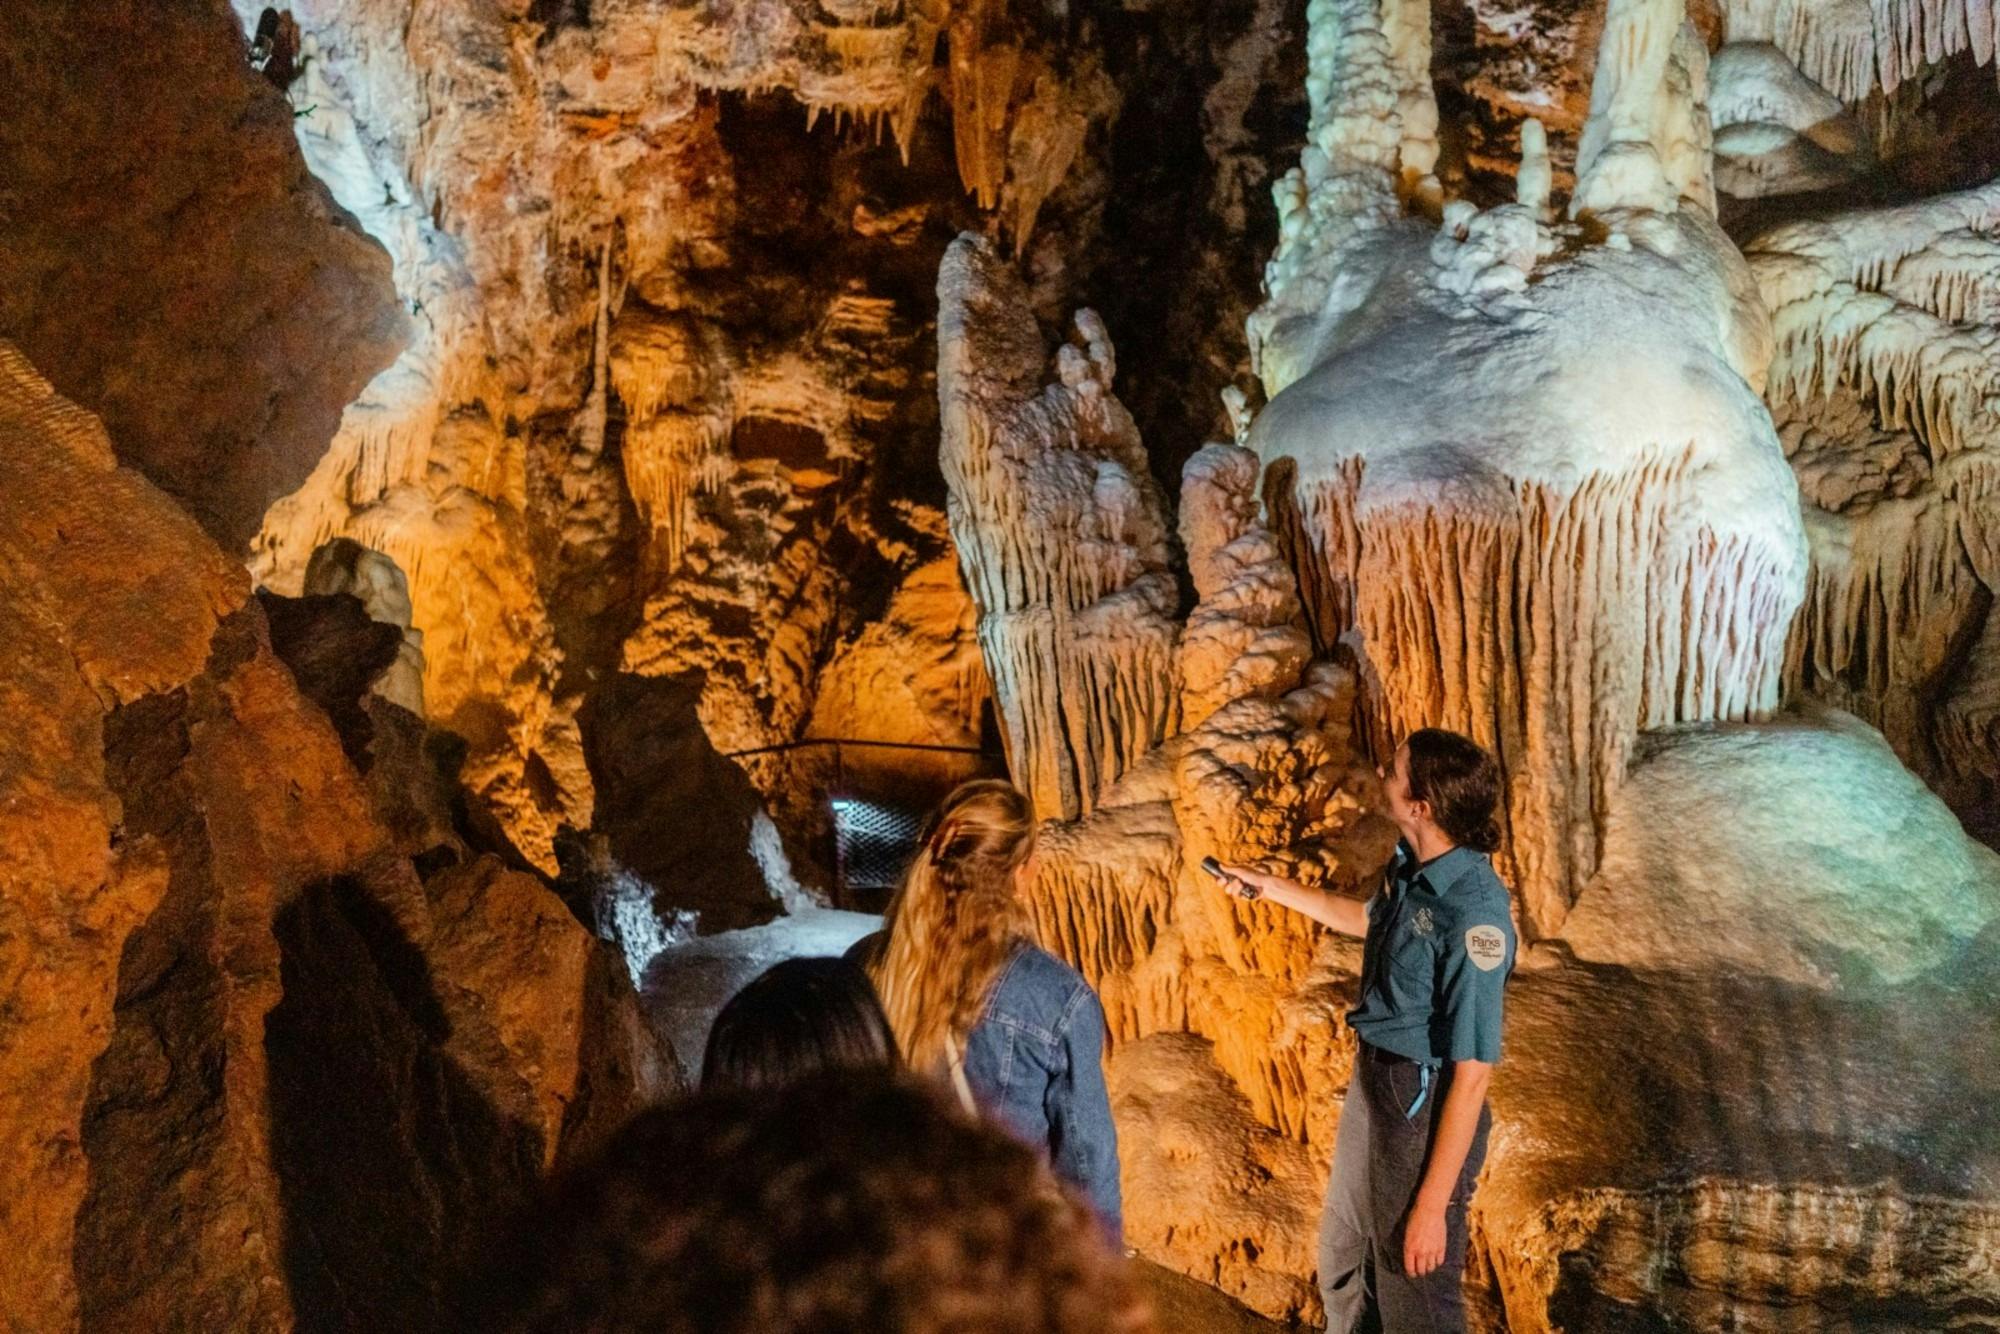 A guided tour is the only way to see this remarkable cave system